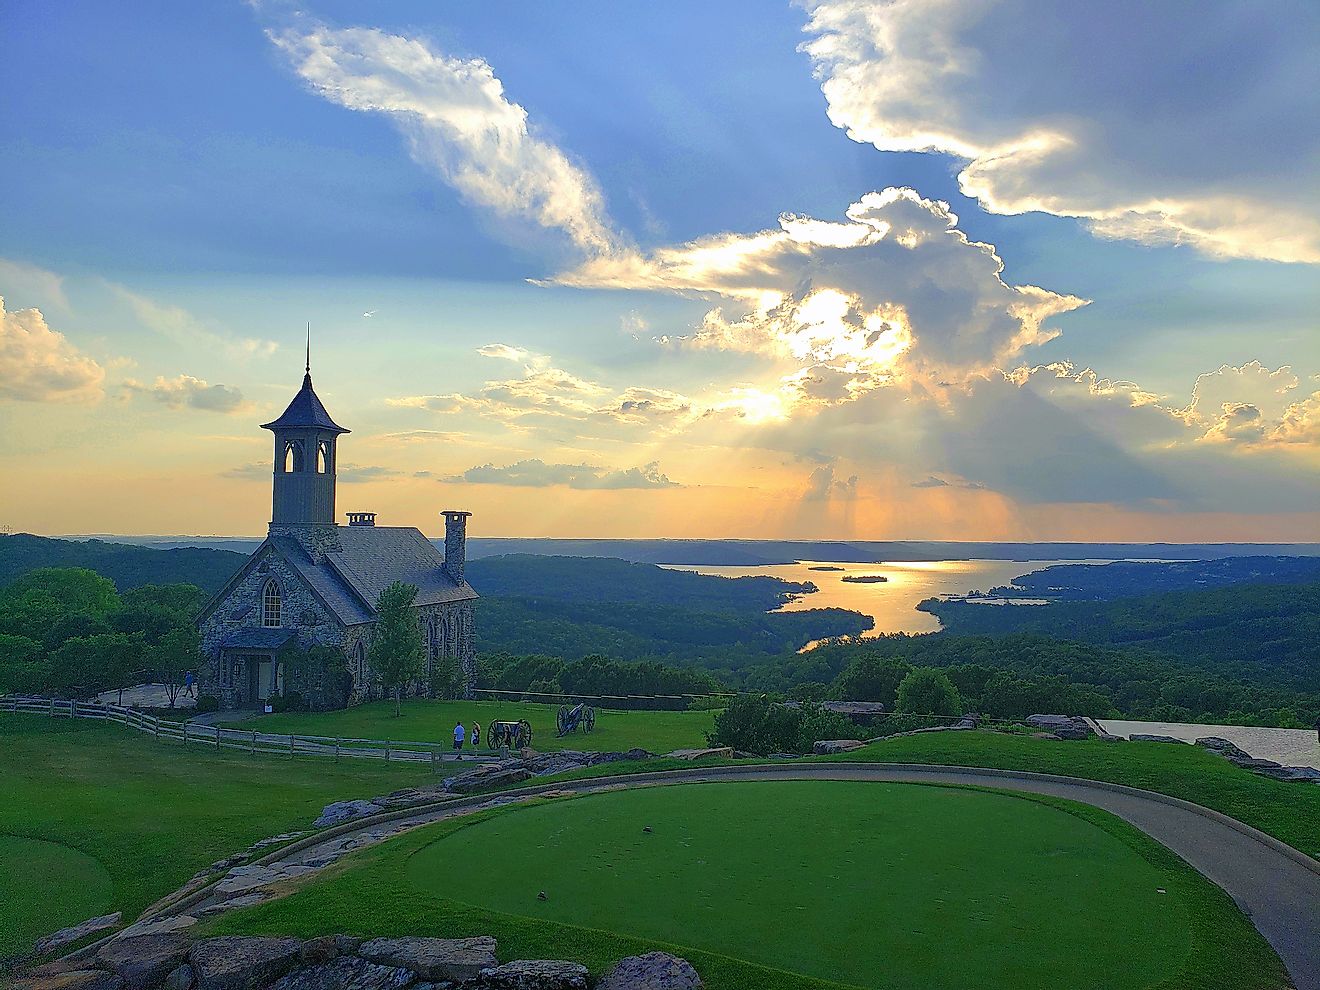 Chapel of the Ozarks in Branson, Missouri at Sunset with Table Rock Lake in the background.